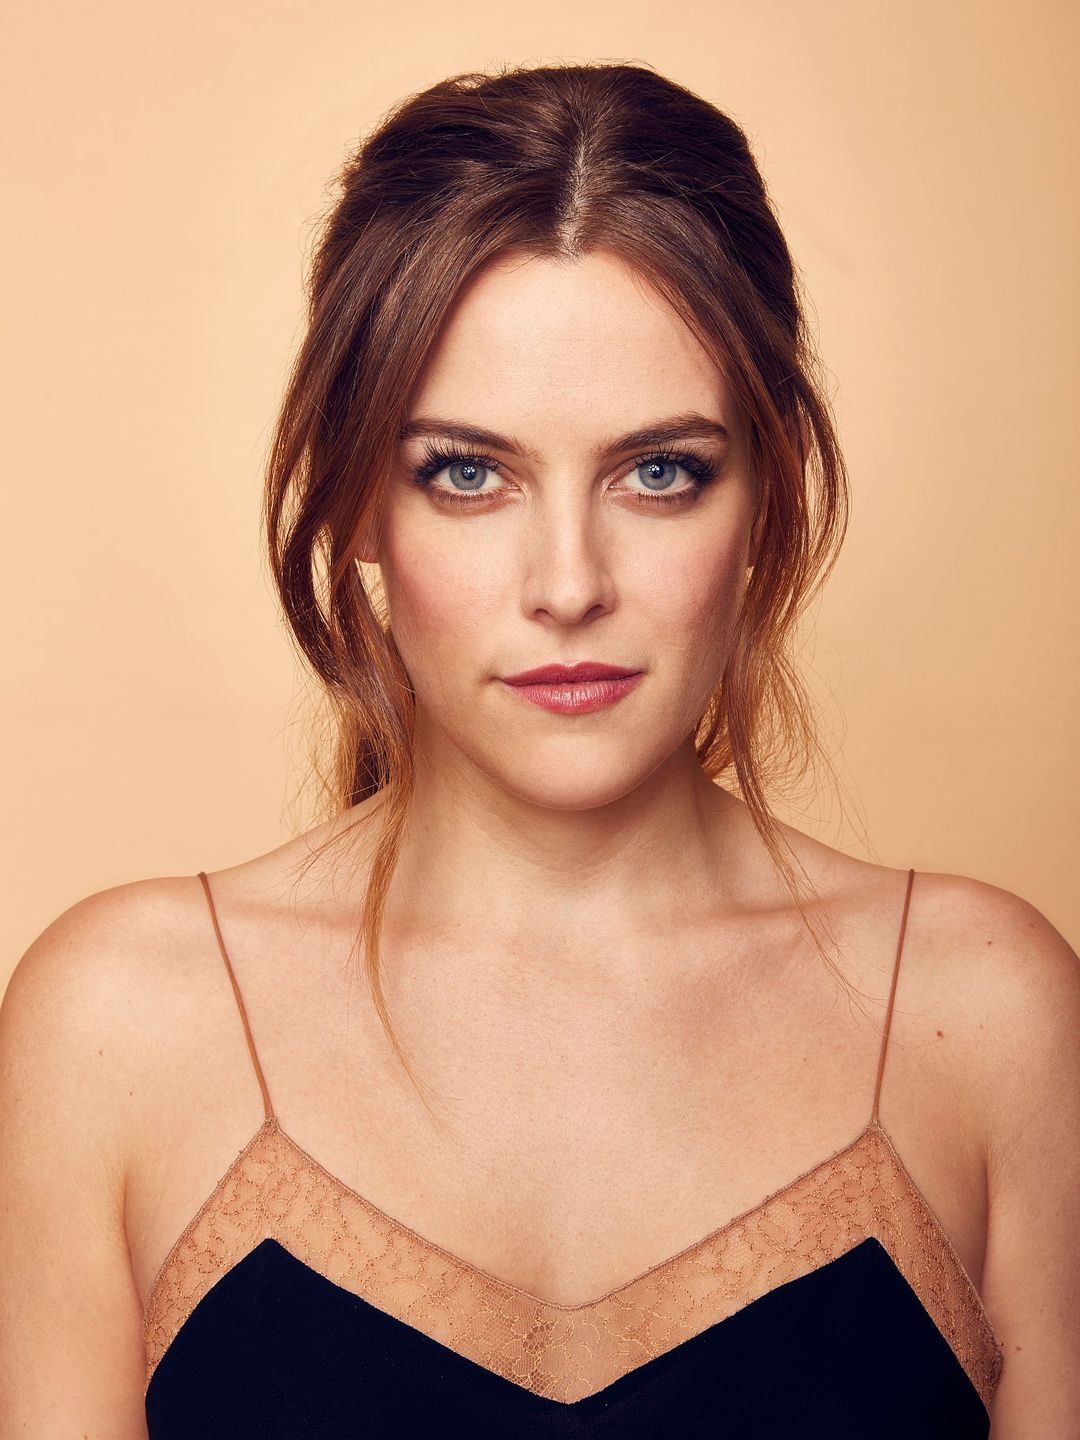 Riley Keough early childhood